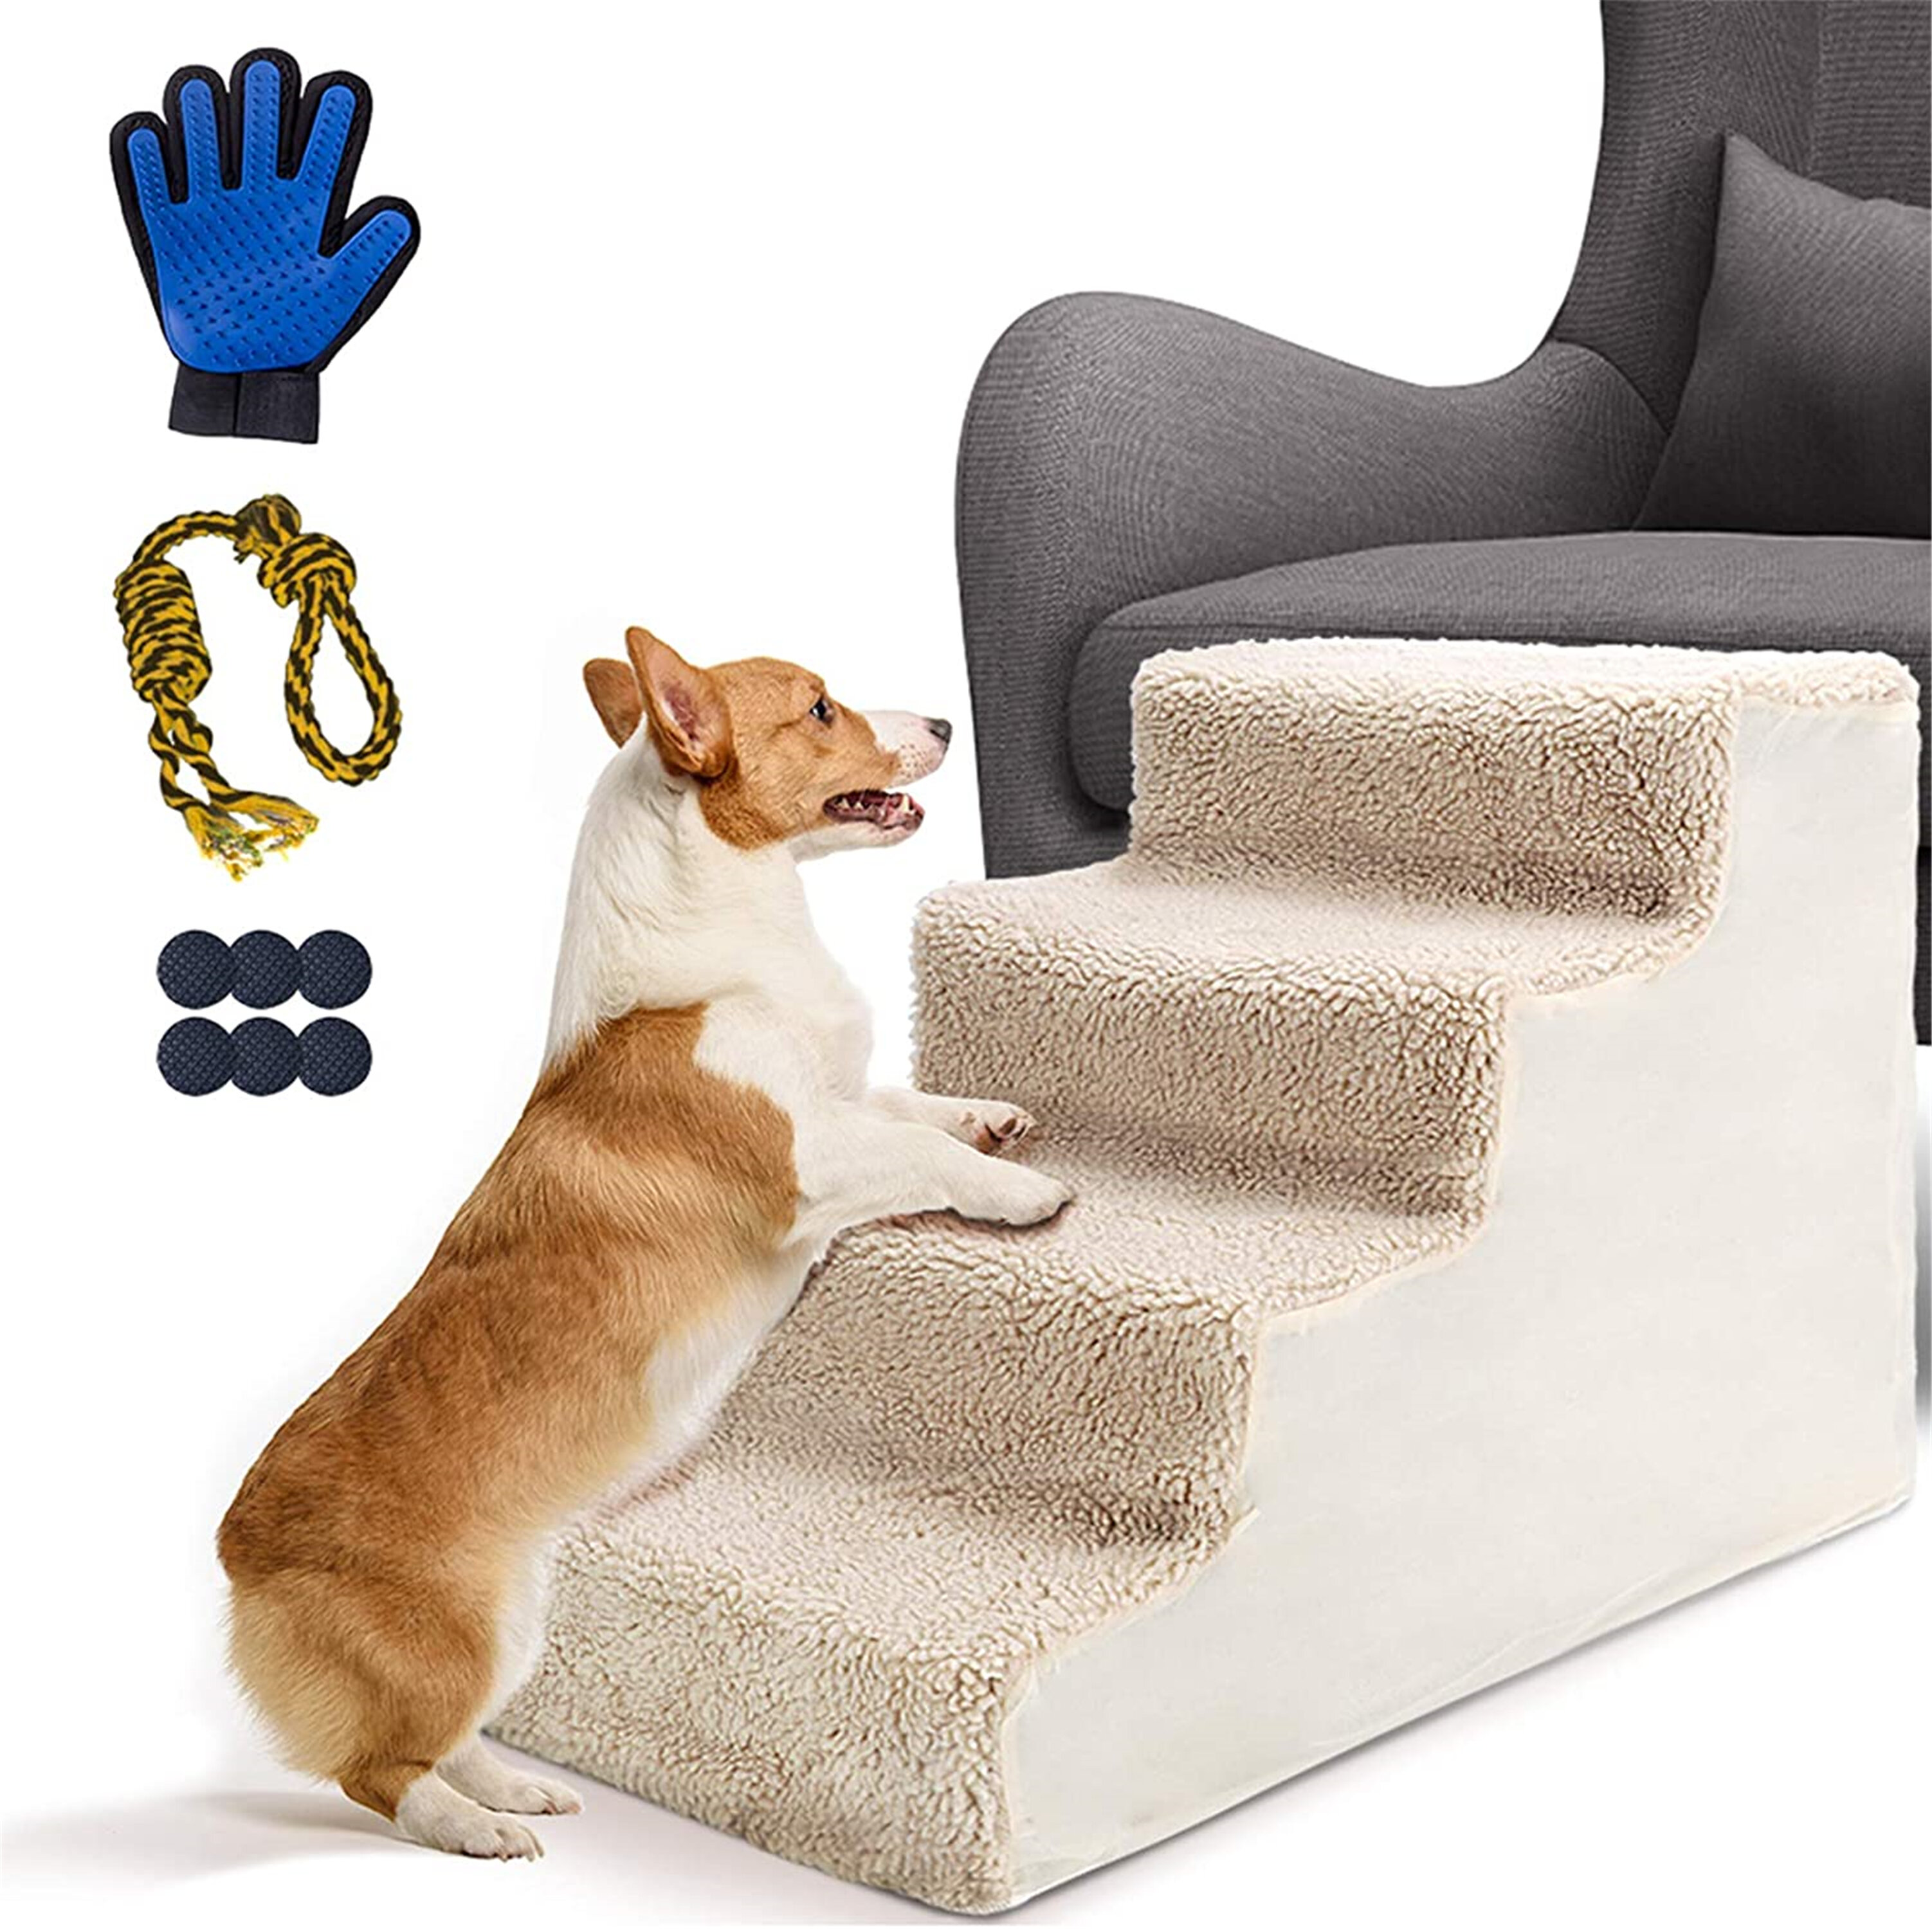 A.FATI 3 Steps Pet Stair High Density Foam Pet Steps,Non-Slip Dog Stairs,Dog Ramp for Sofa,Soft Foam Dog Ladder,Best for Dogs,Older Cats（Gift Gloves and Rope）